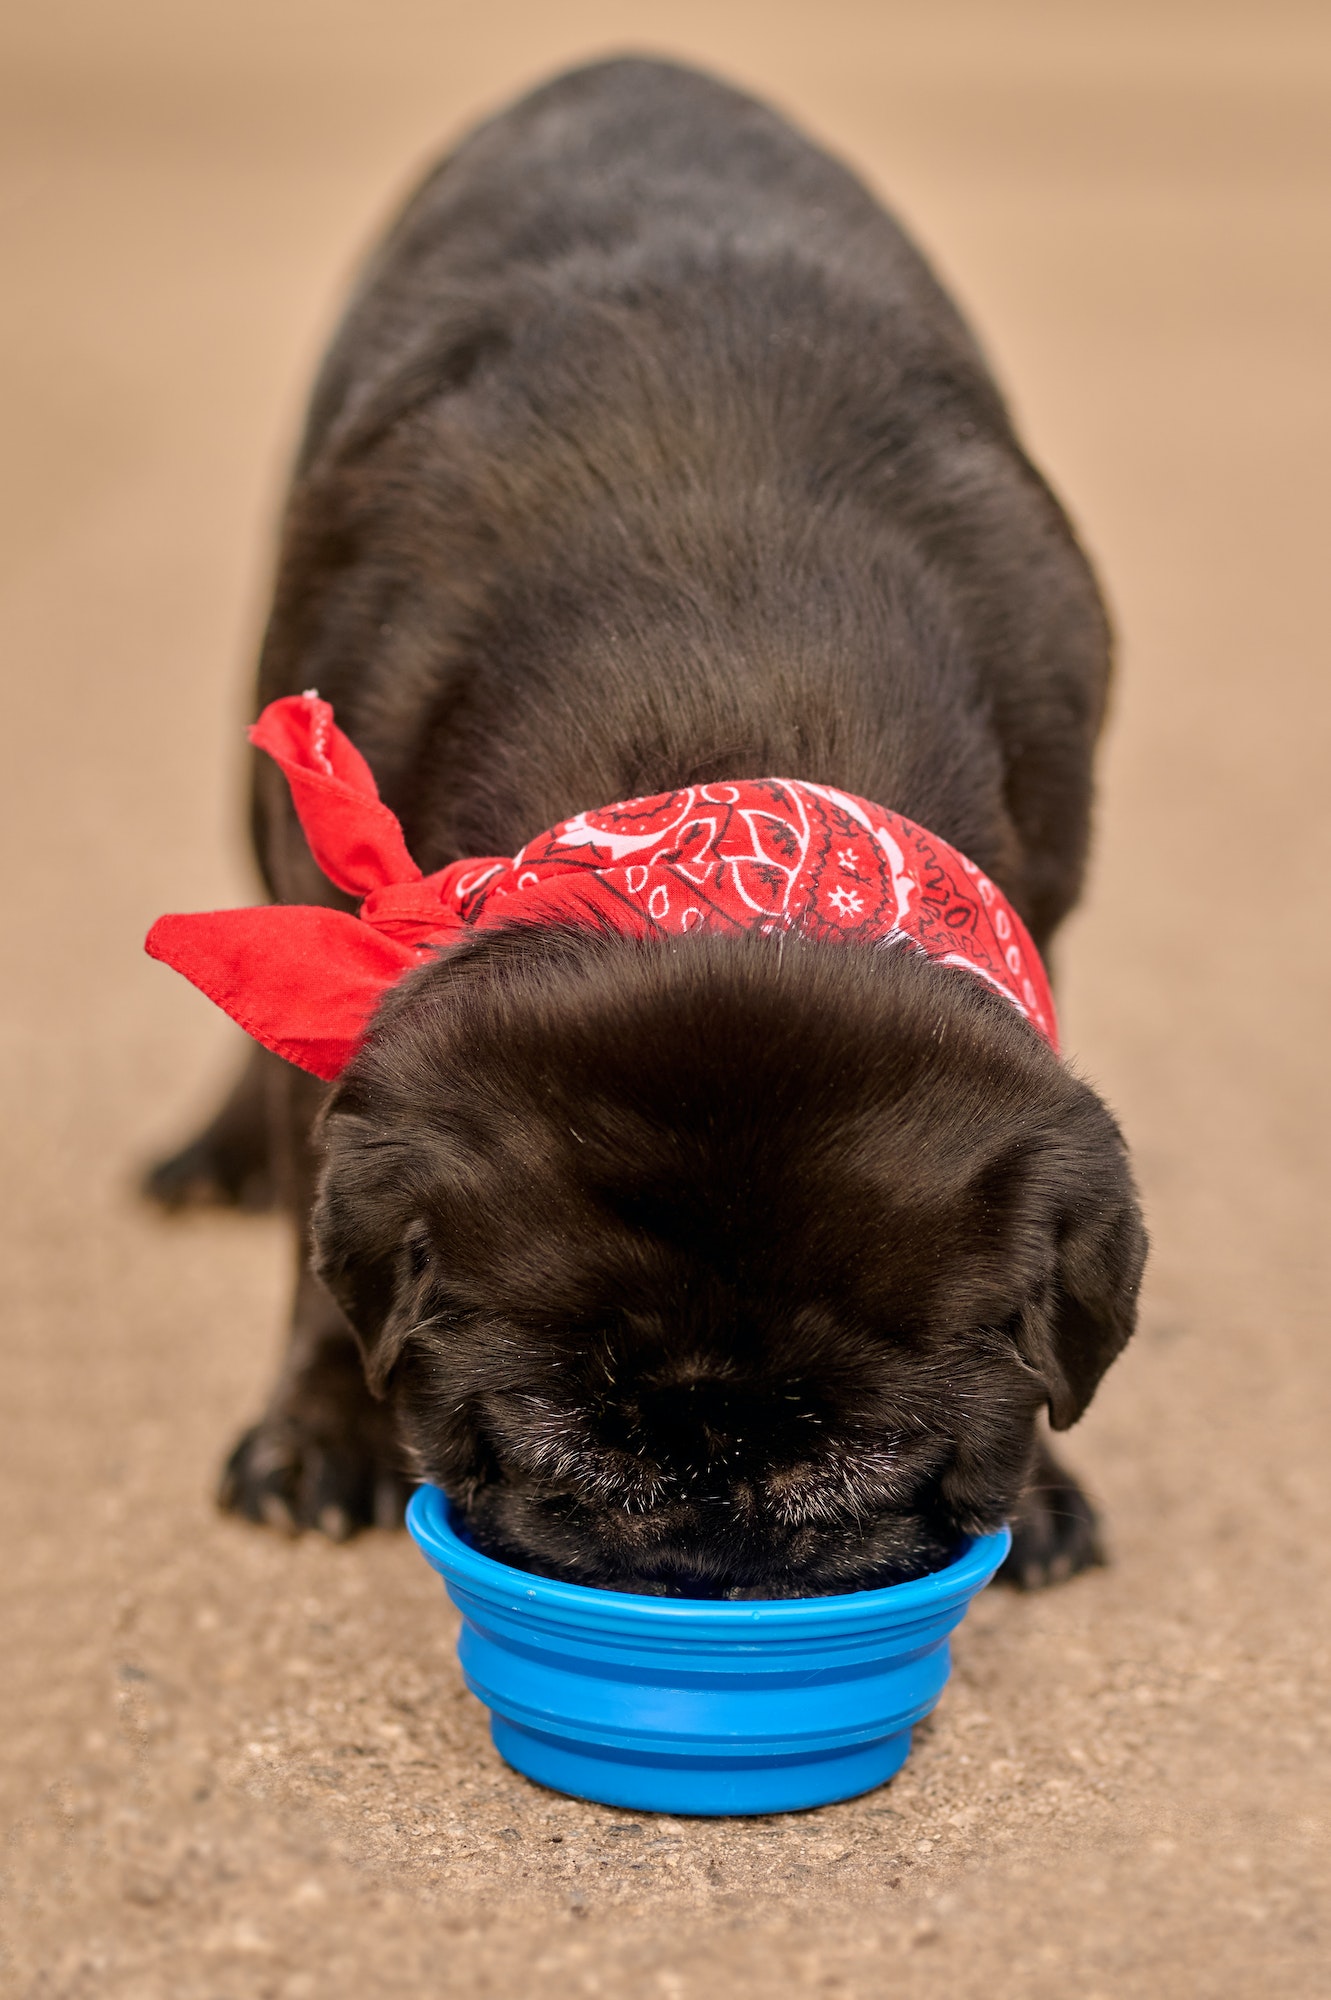 A black dog drinking water from the bowl